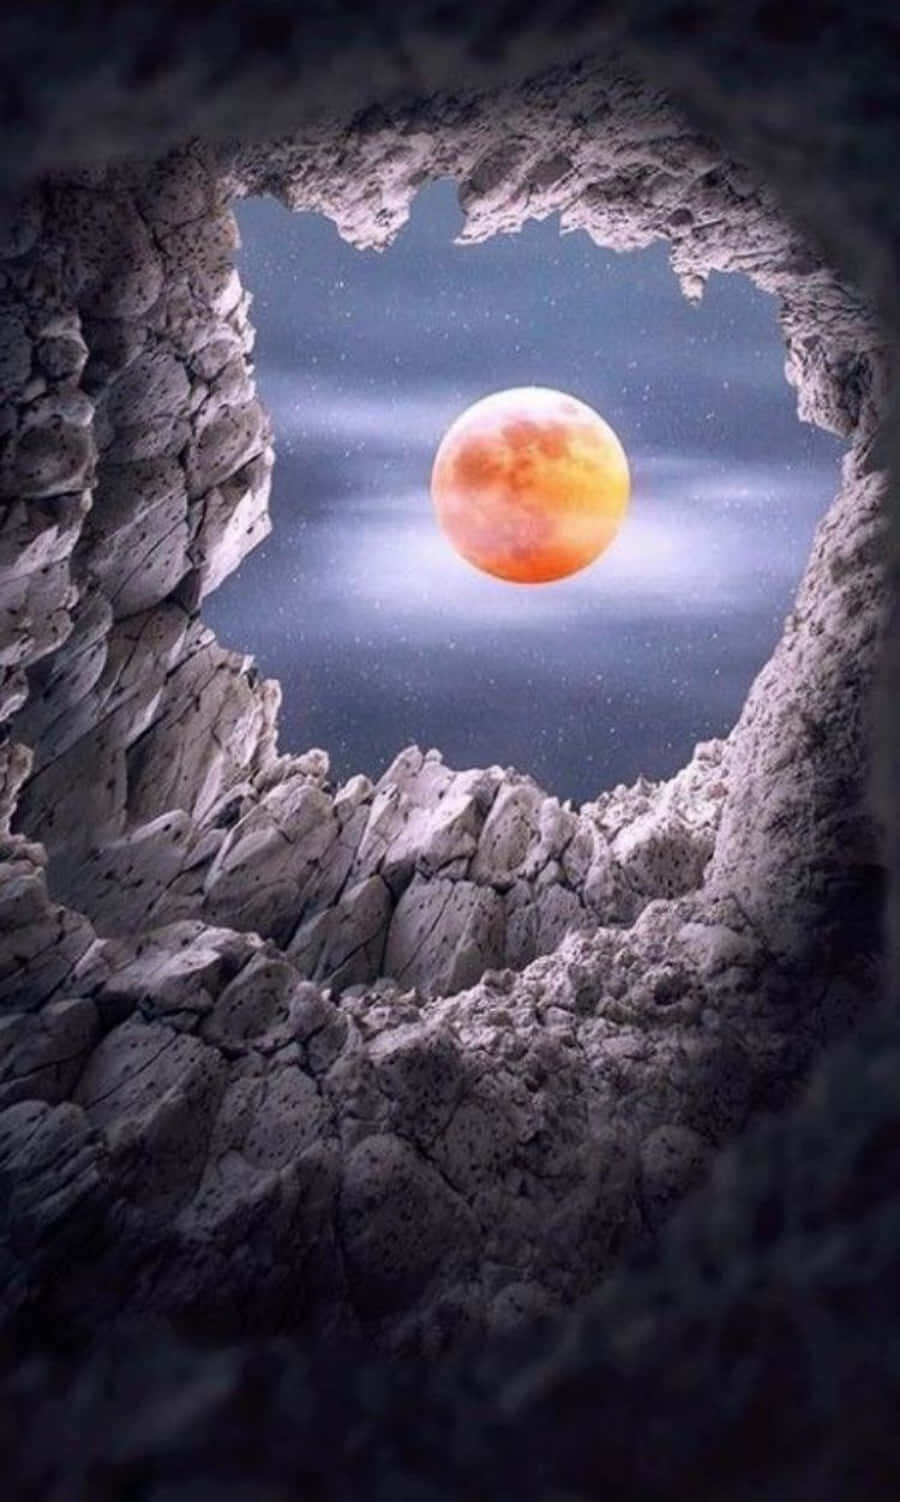 Captivating View of a Moonlit Night